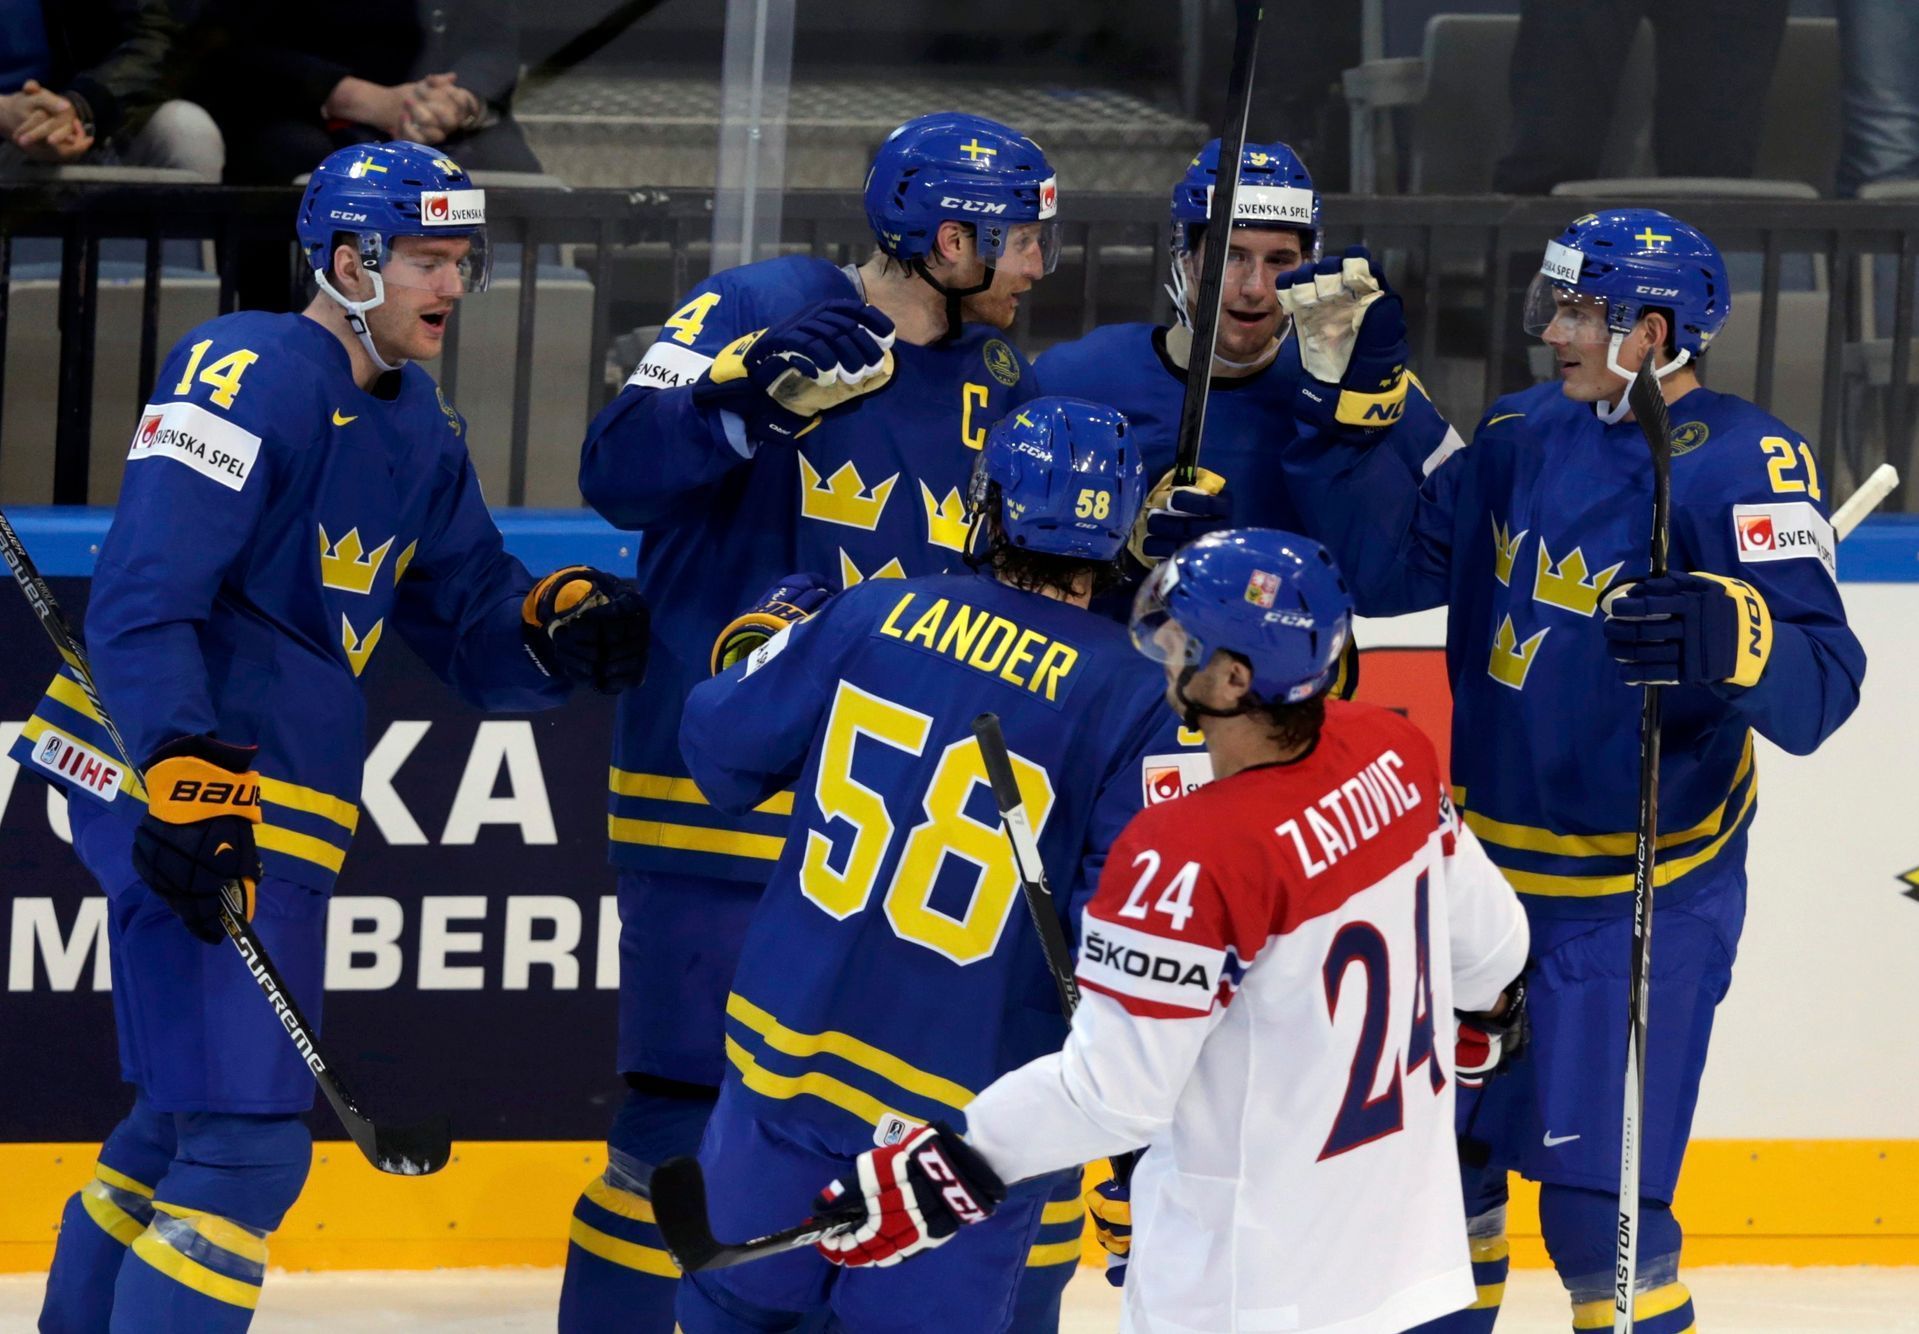 Sweden's Kronwall celebrates with team mates his goal against the Czech Republic during their Ice Hockey World Championship game at O2 arena in Prague